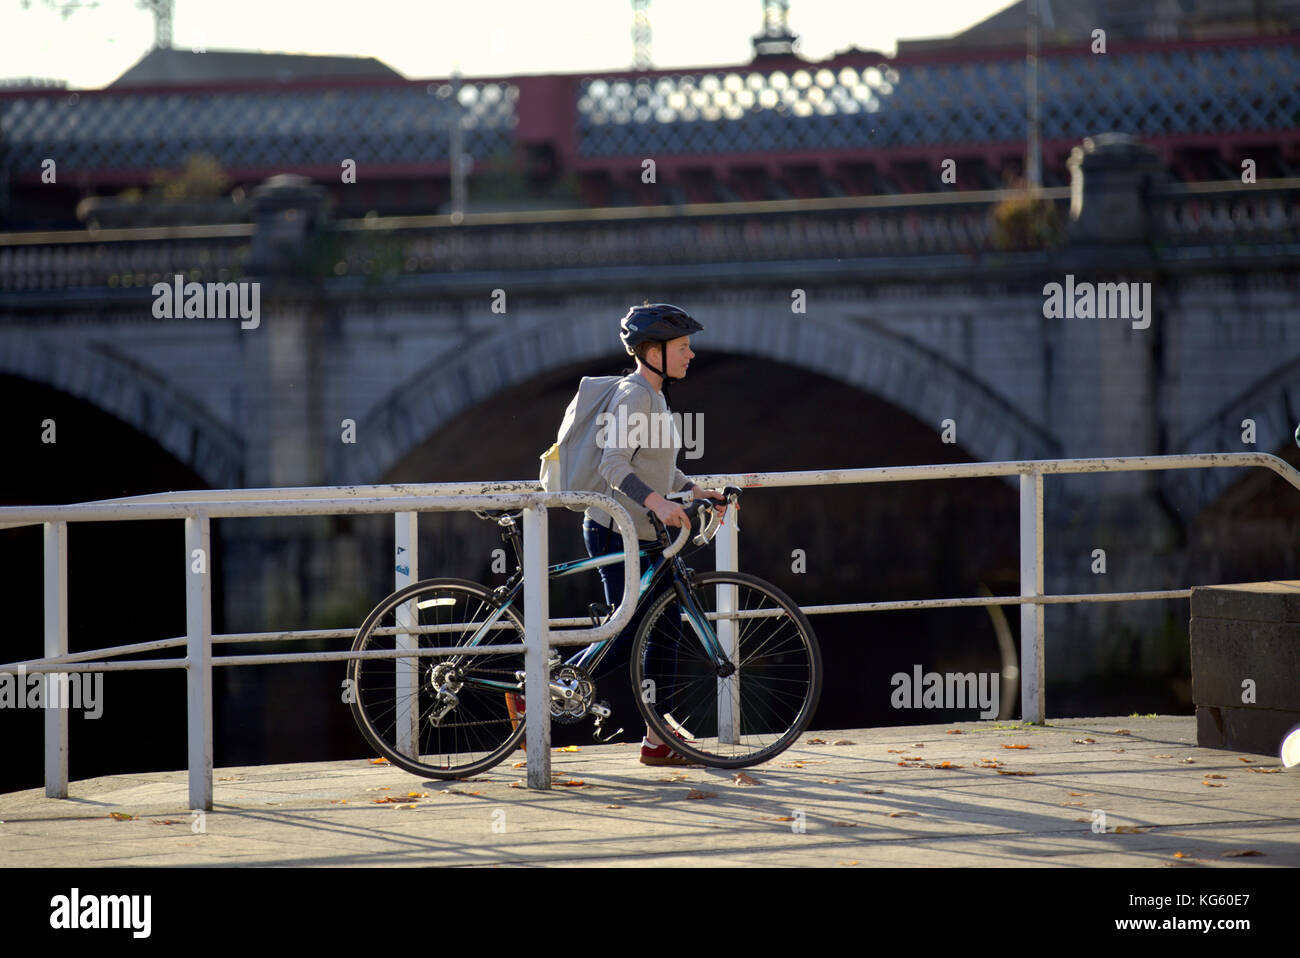 young person boy on bicycle bike dismounted on clyde river cycle path walkway entering street turn off for city centre near king george 5th bridge Stock Photo